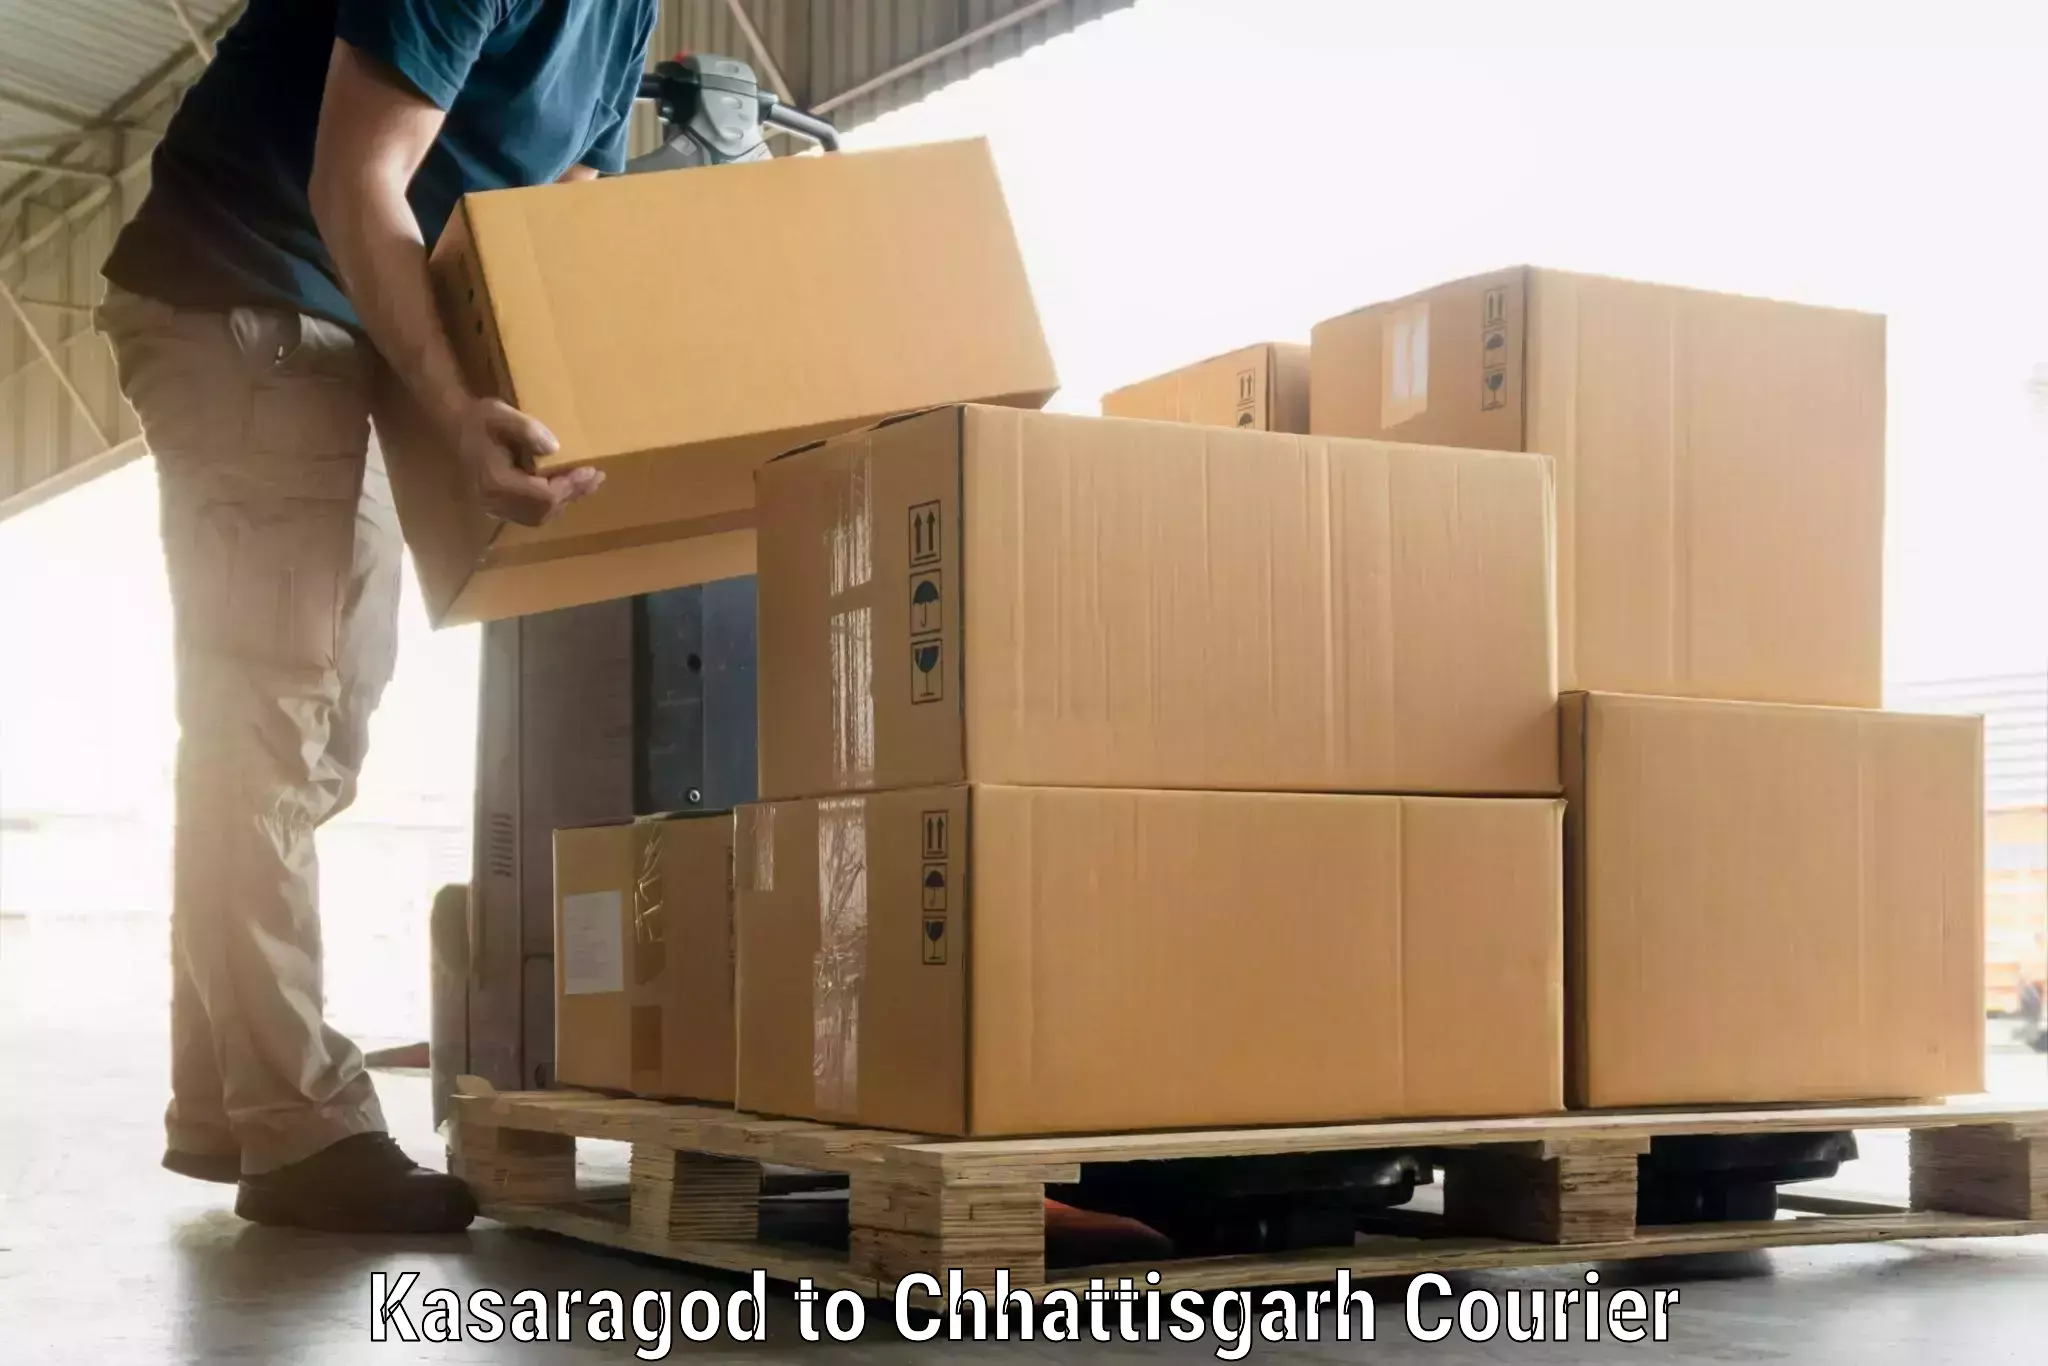 Luggage delivery network Kasaragod to Chhattisgarh